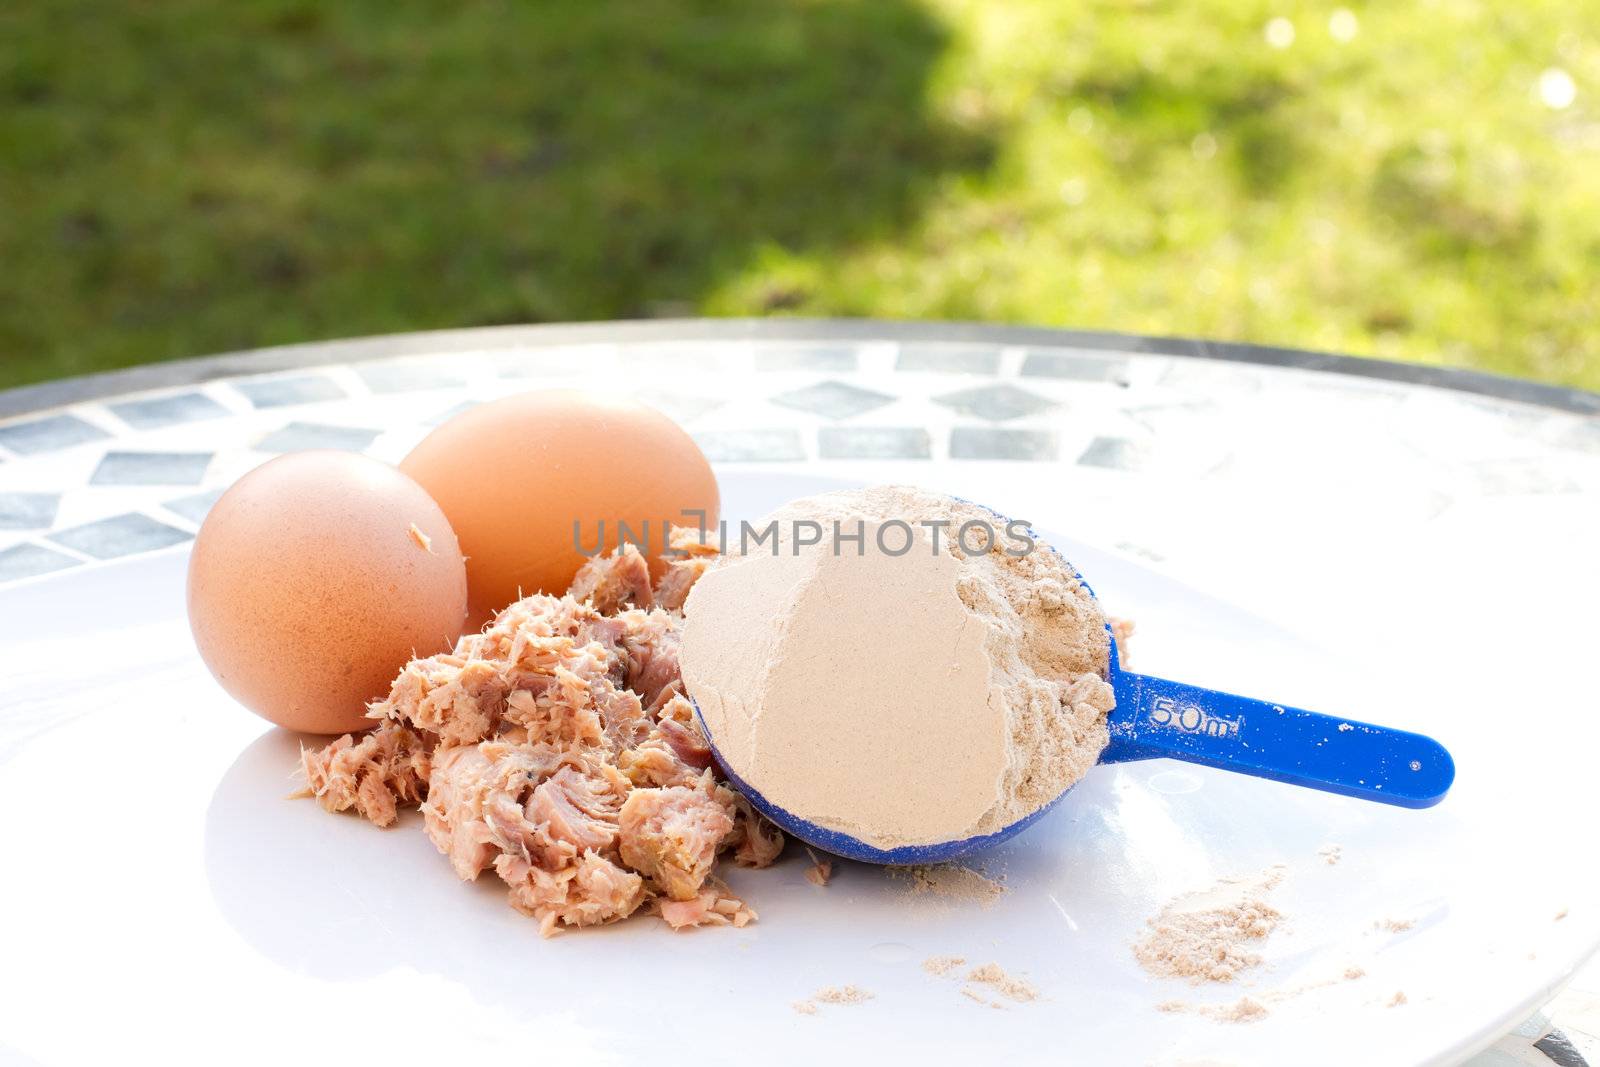 Tuna, egg and whey protein powder on a white plate by smikeymikey1